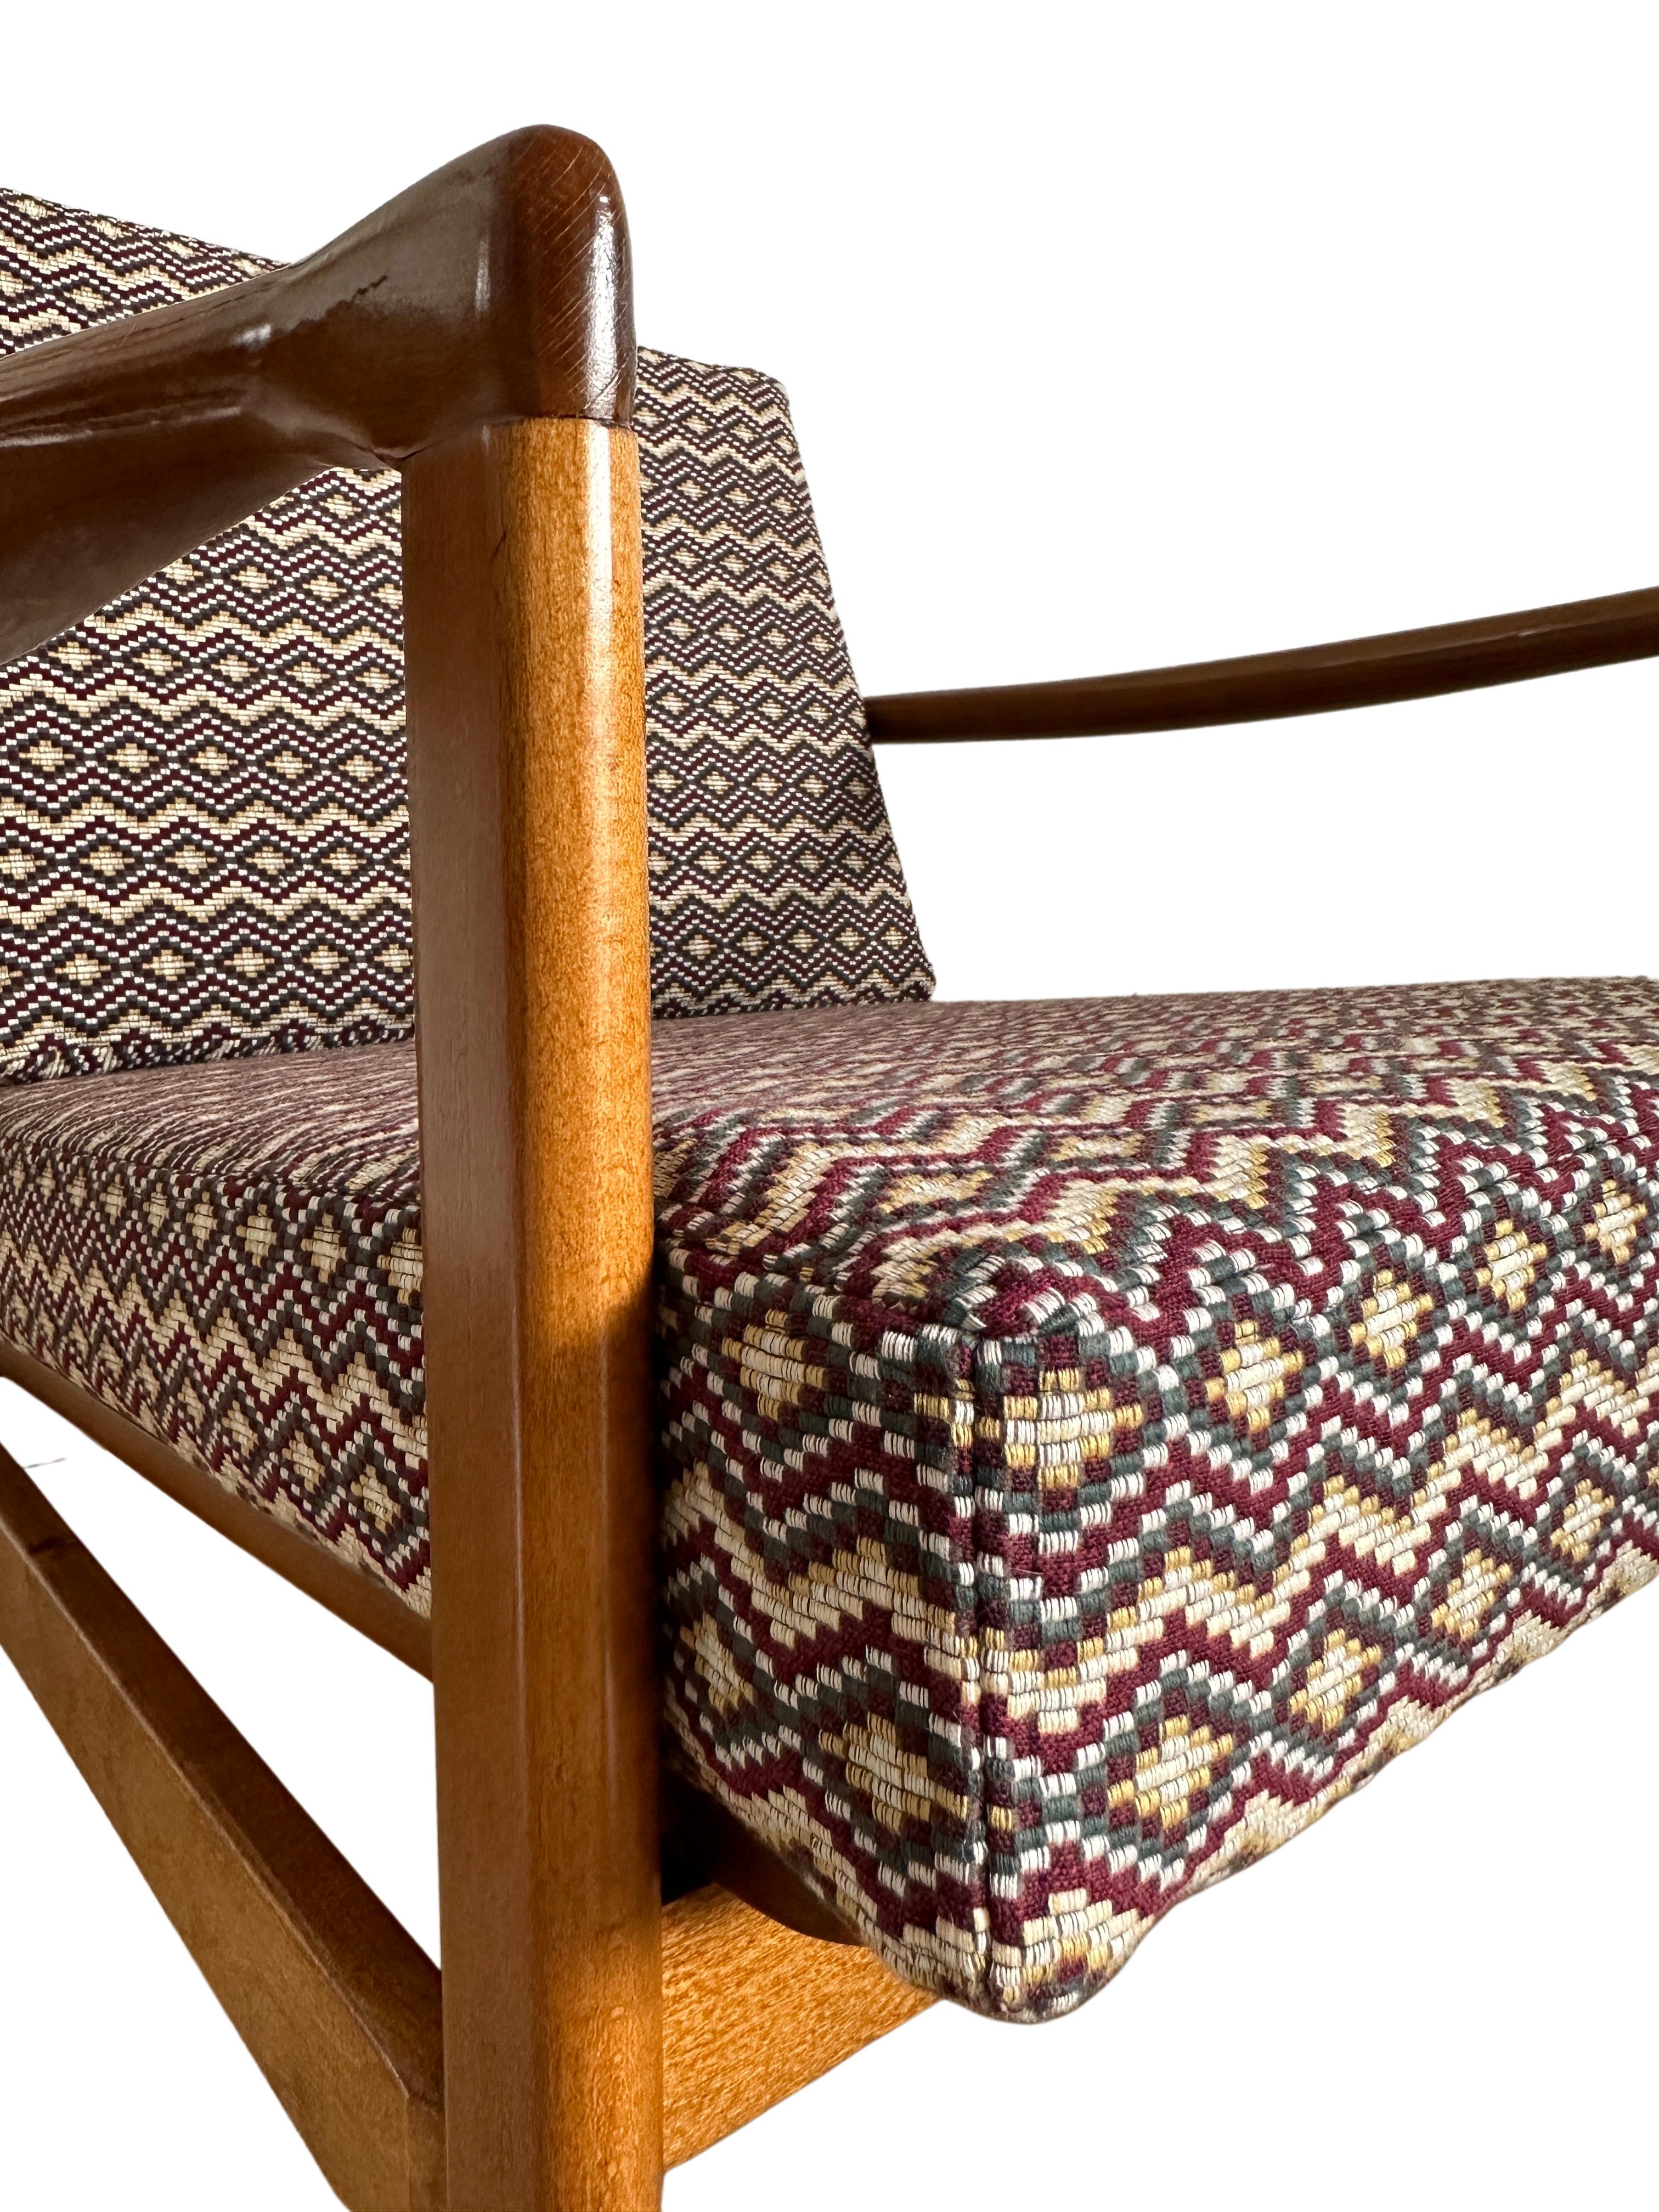 Midcentury Armchair, in Geometric and Ethnic Fabric, Europe, 1960s For Sale 9